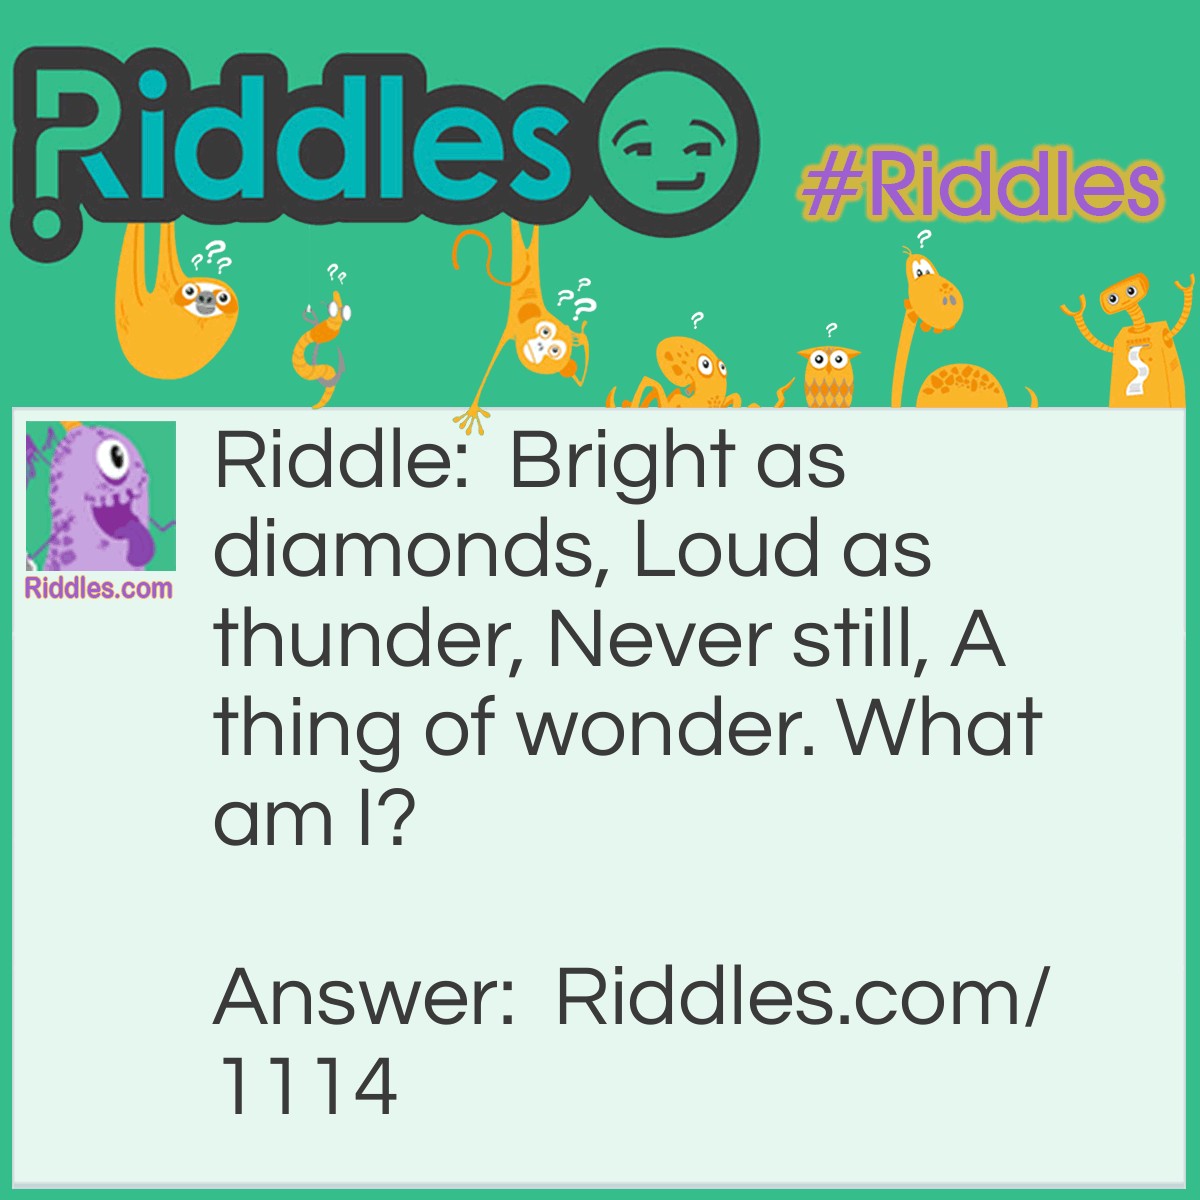 Riddle: Bright as diamonds, Loud as thunder, Never still, A thing of wonder. What am I? Answer: A Waterfall.